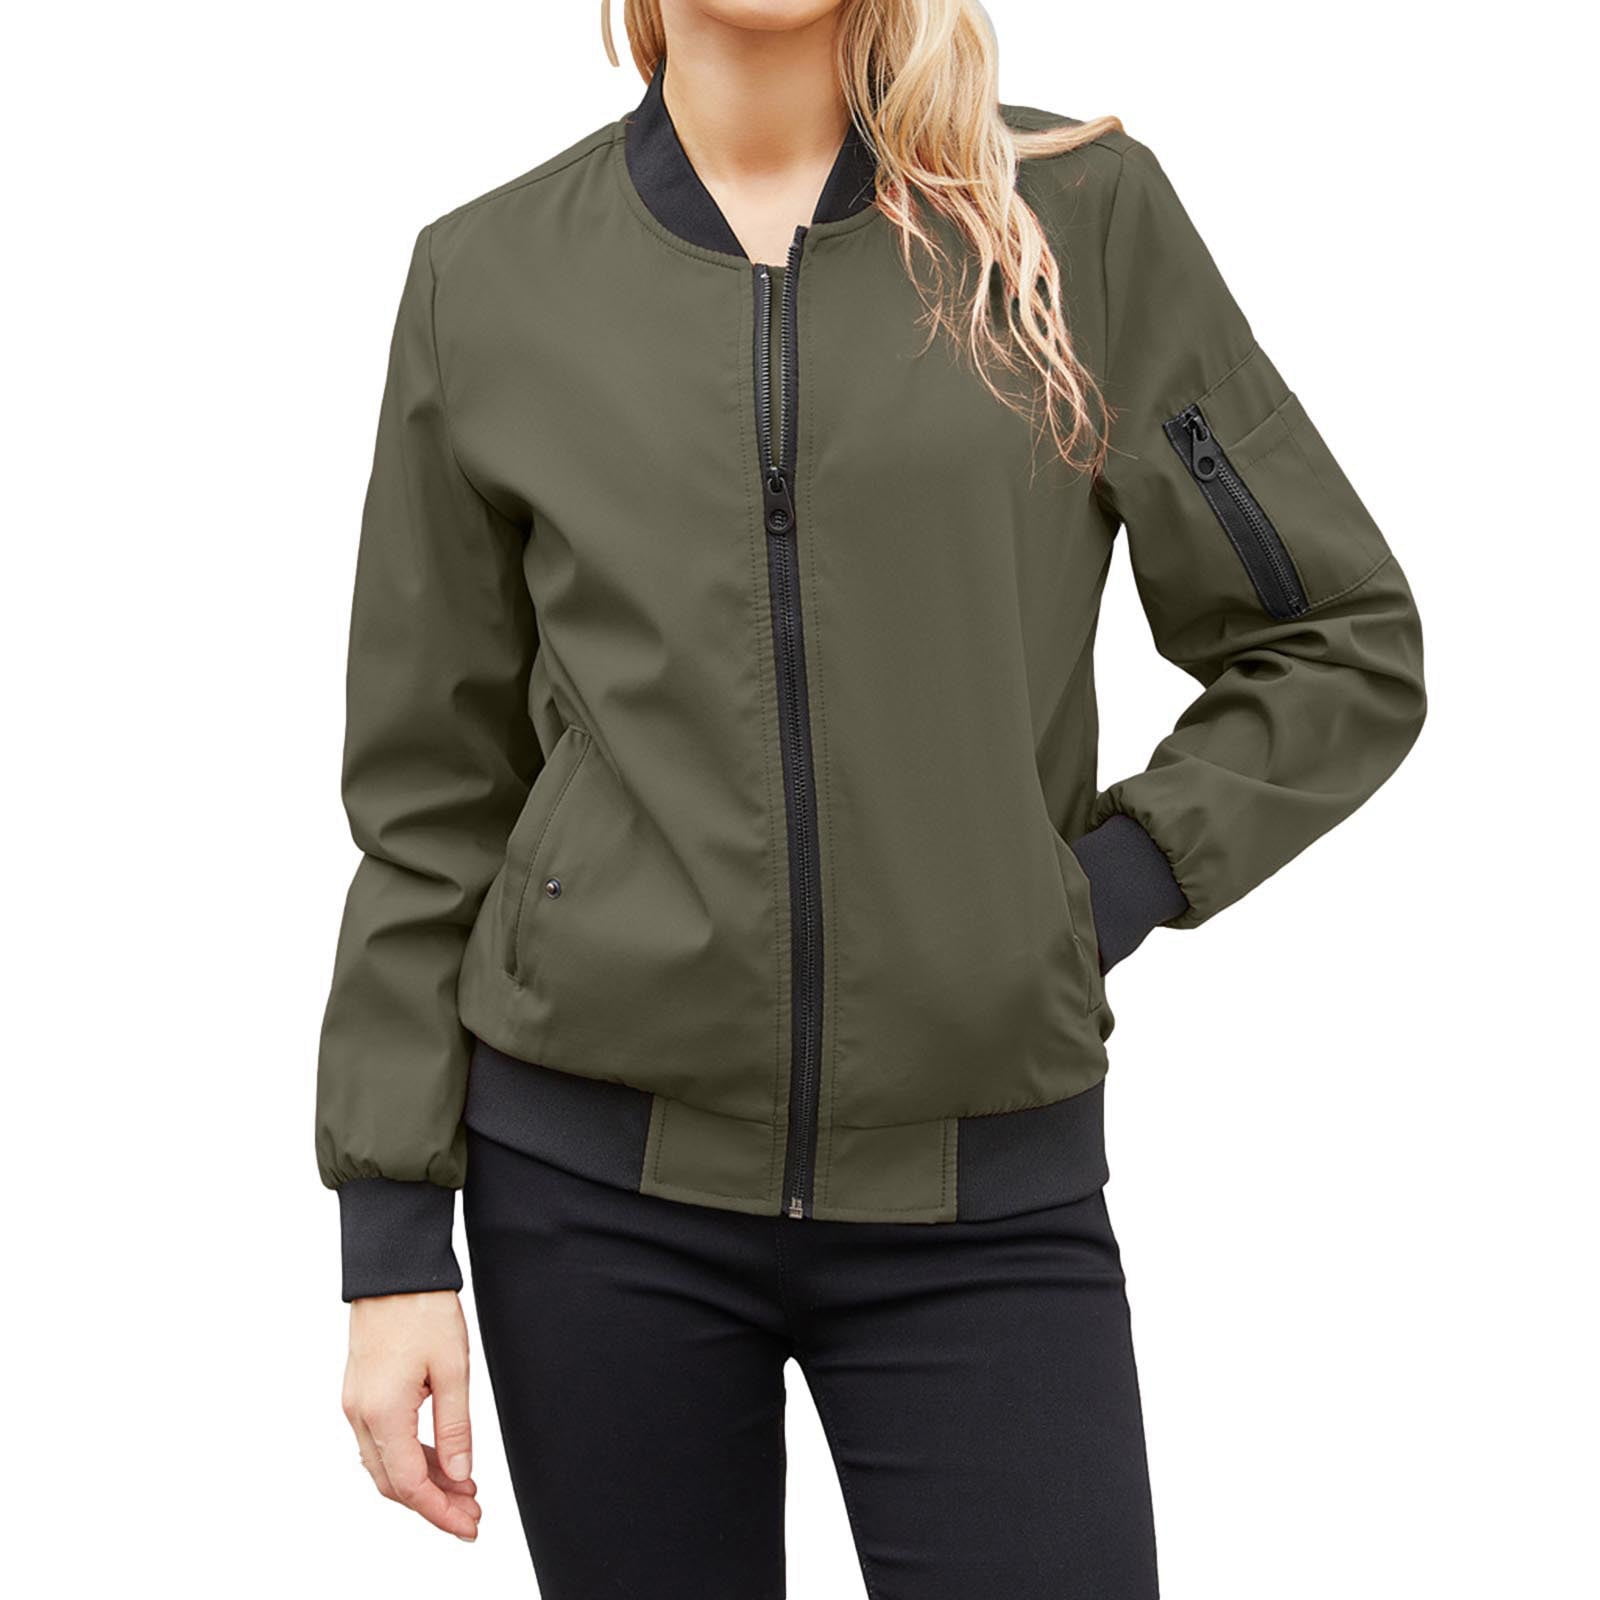 CHUOAND Women's Solid Color Jacket,sweatshirt for prime deals of the day  today only,sales today clearance,bulk tank tops women,sweatshirtes under 30